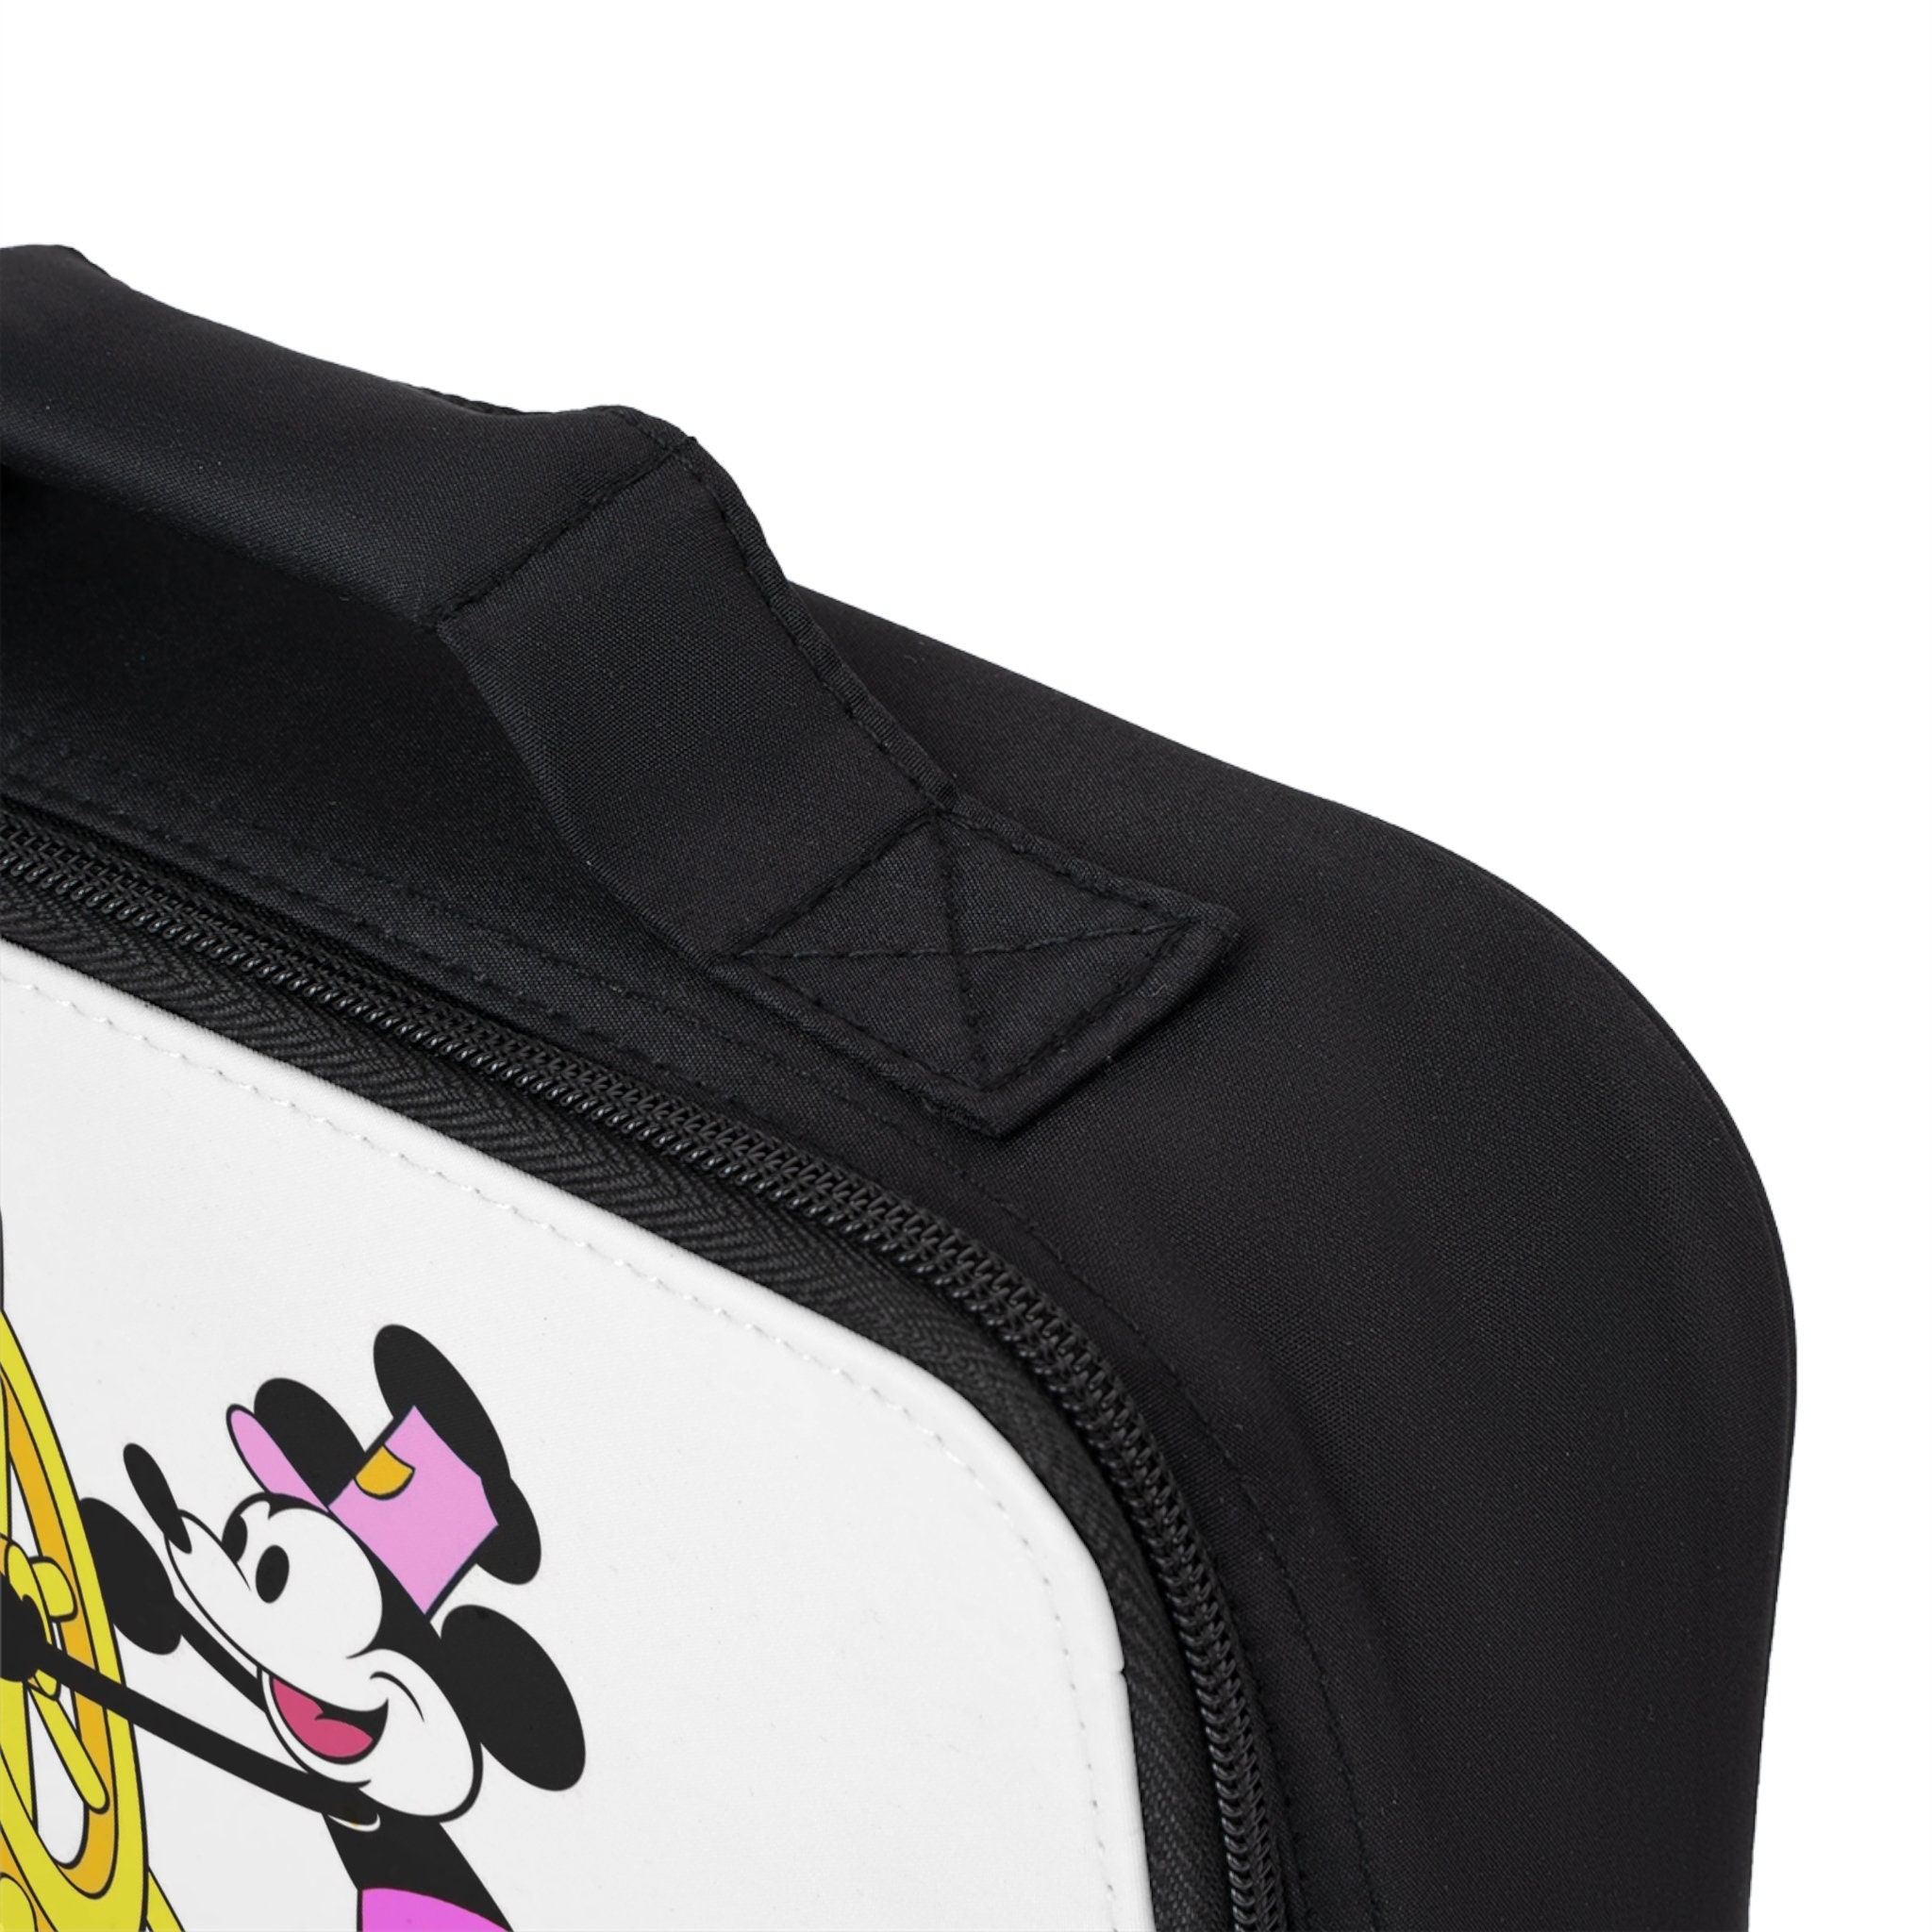 Disney Pink Mickey Mouse Lunch Bag